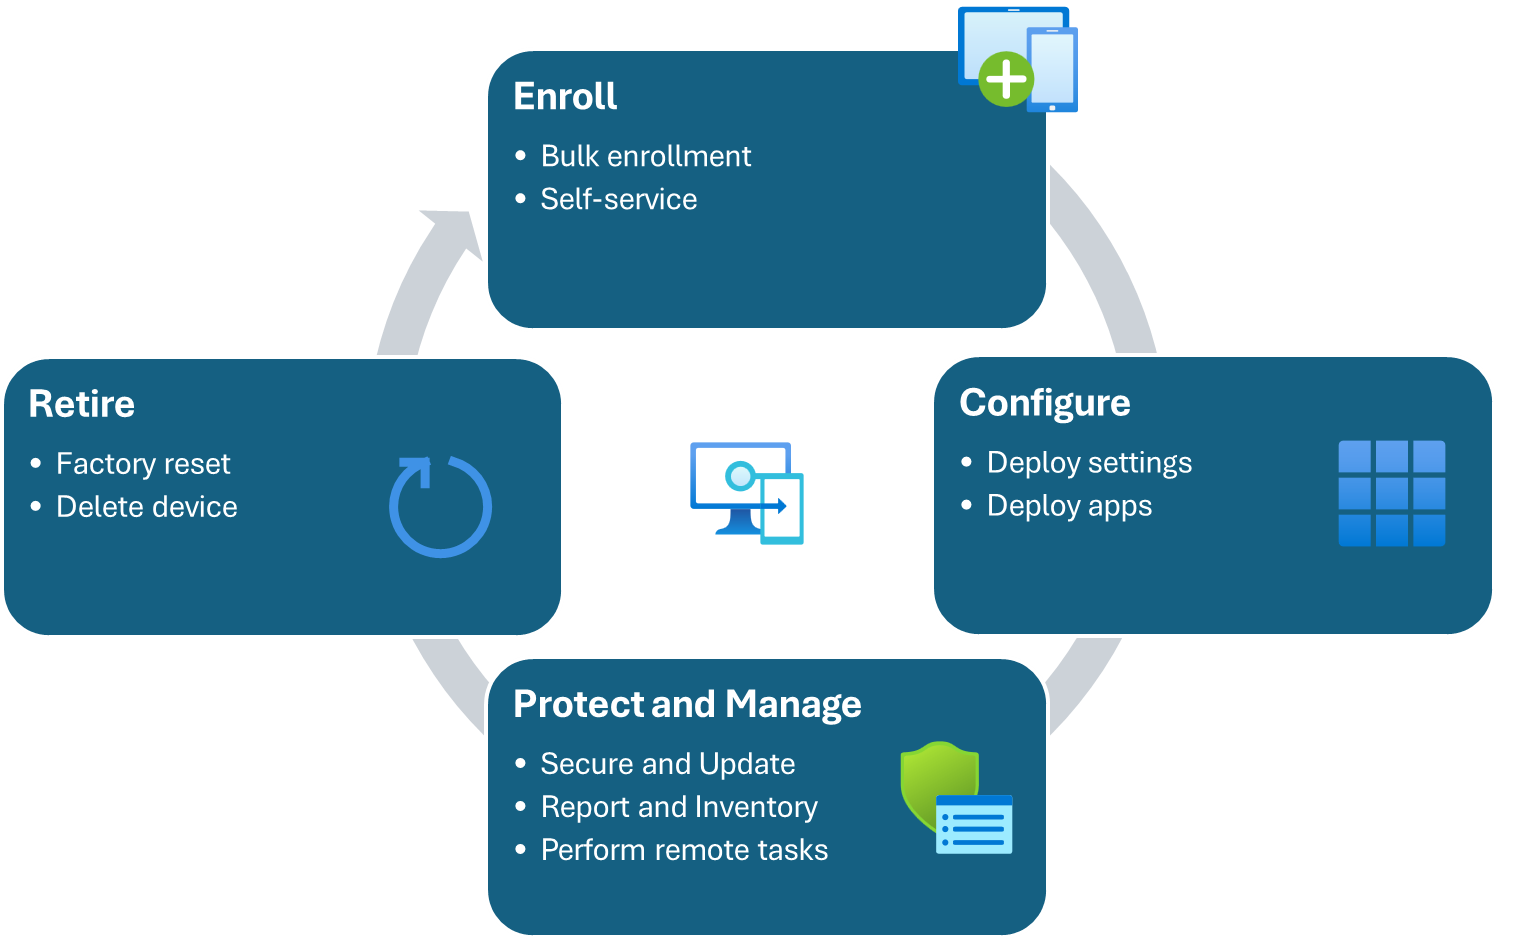 The device lifecycle for Intune-managed devices